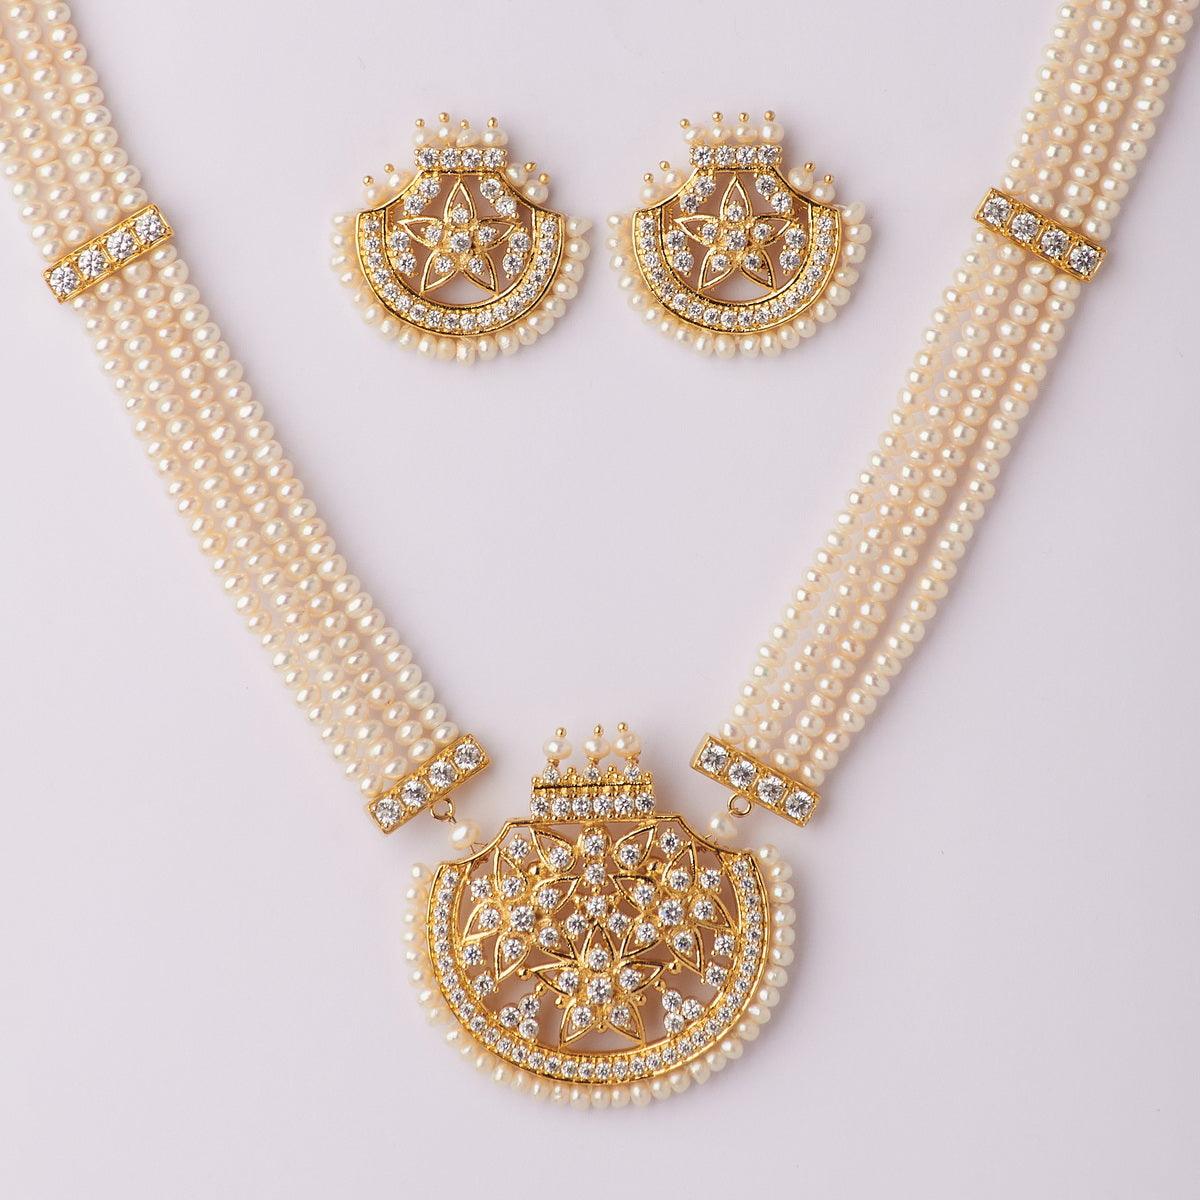 Gorgeous White Pearl Queen Necklace Set - Chandrani Pearls